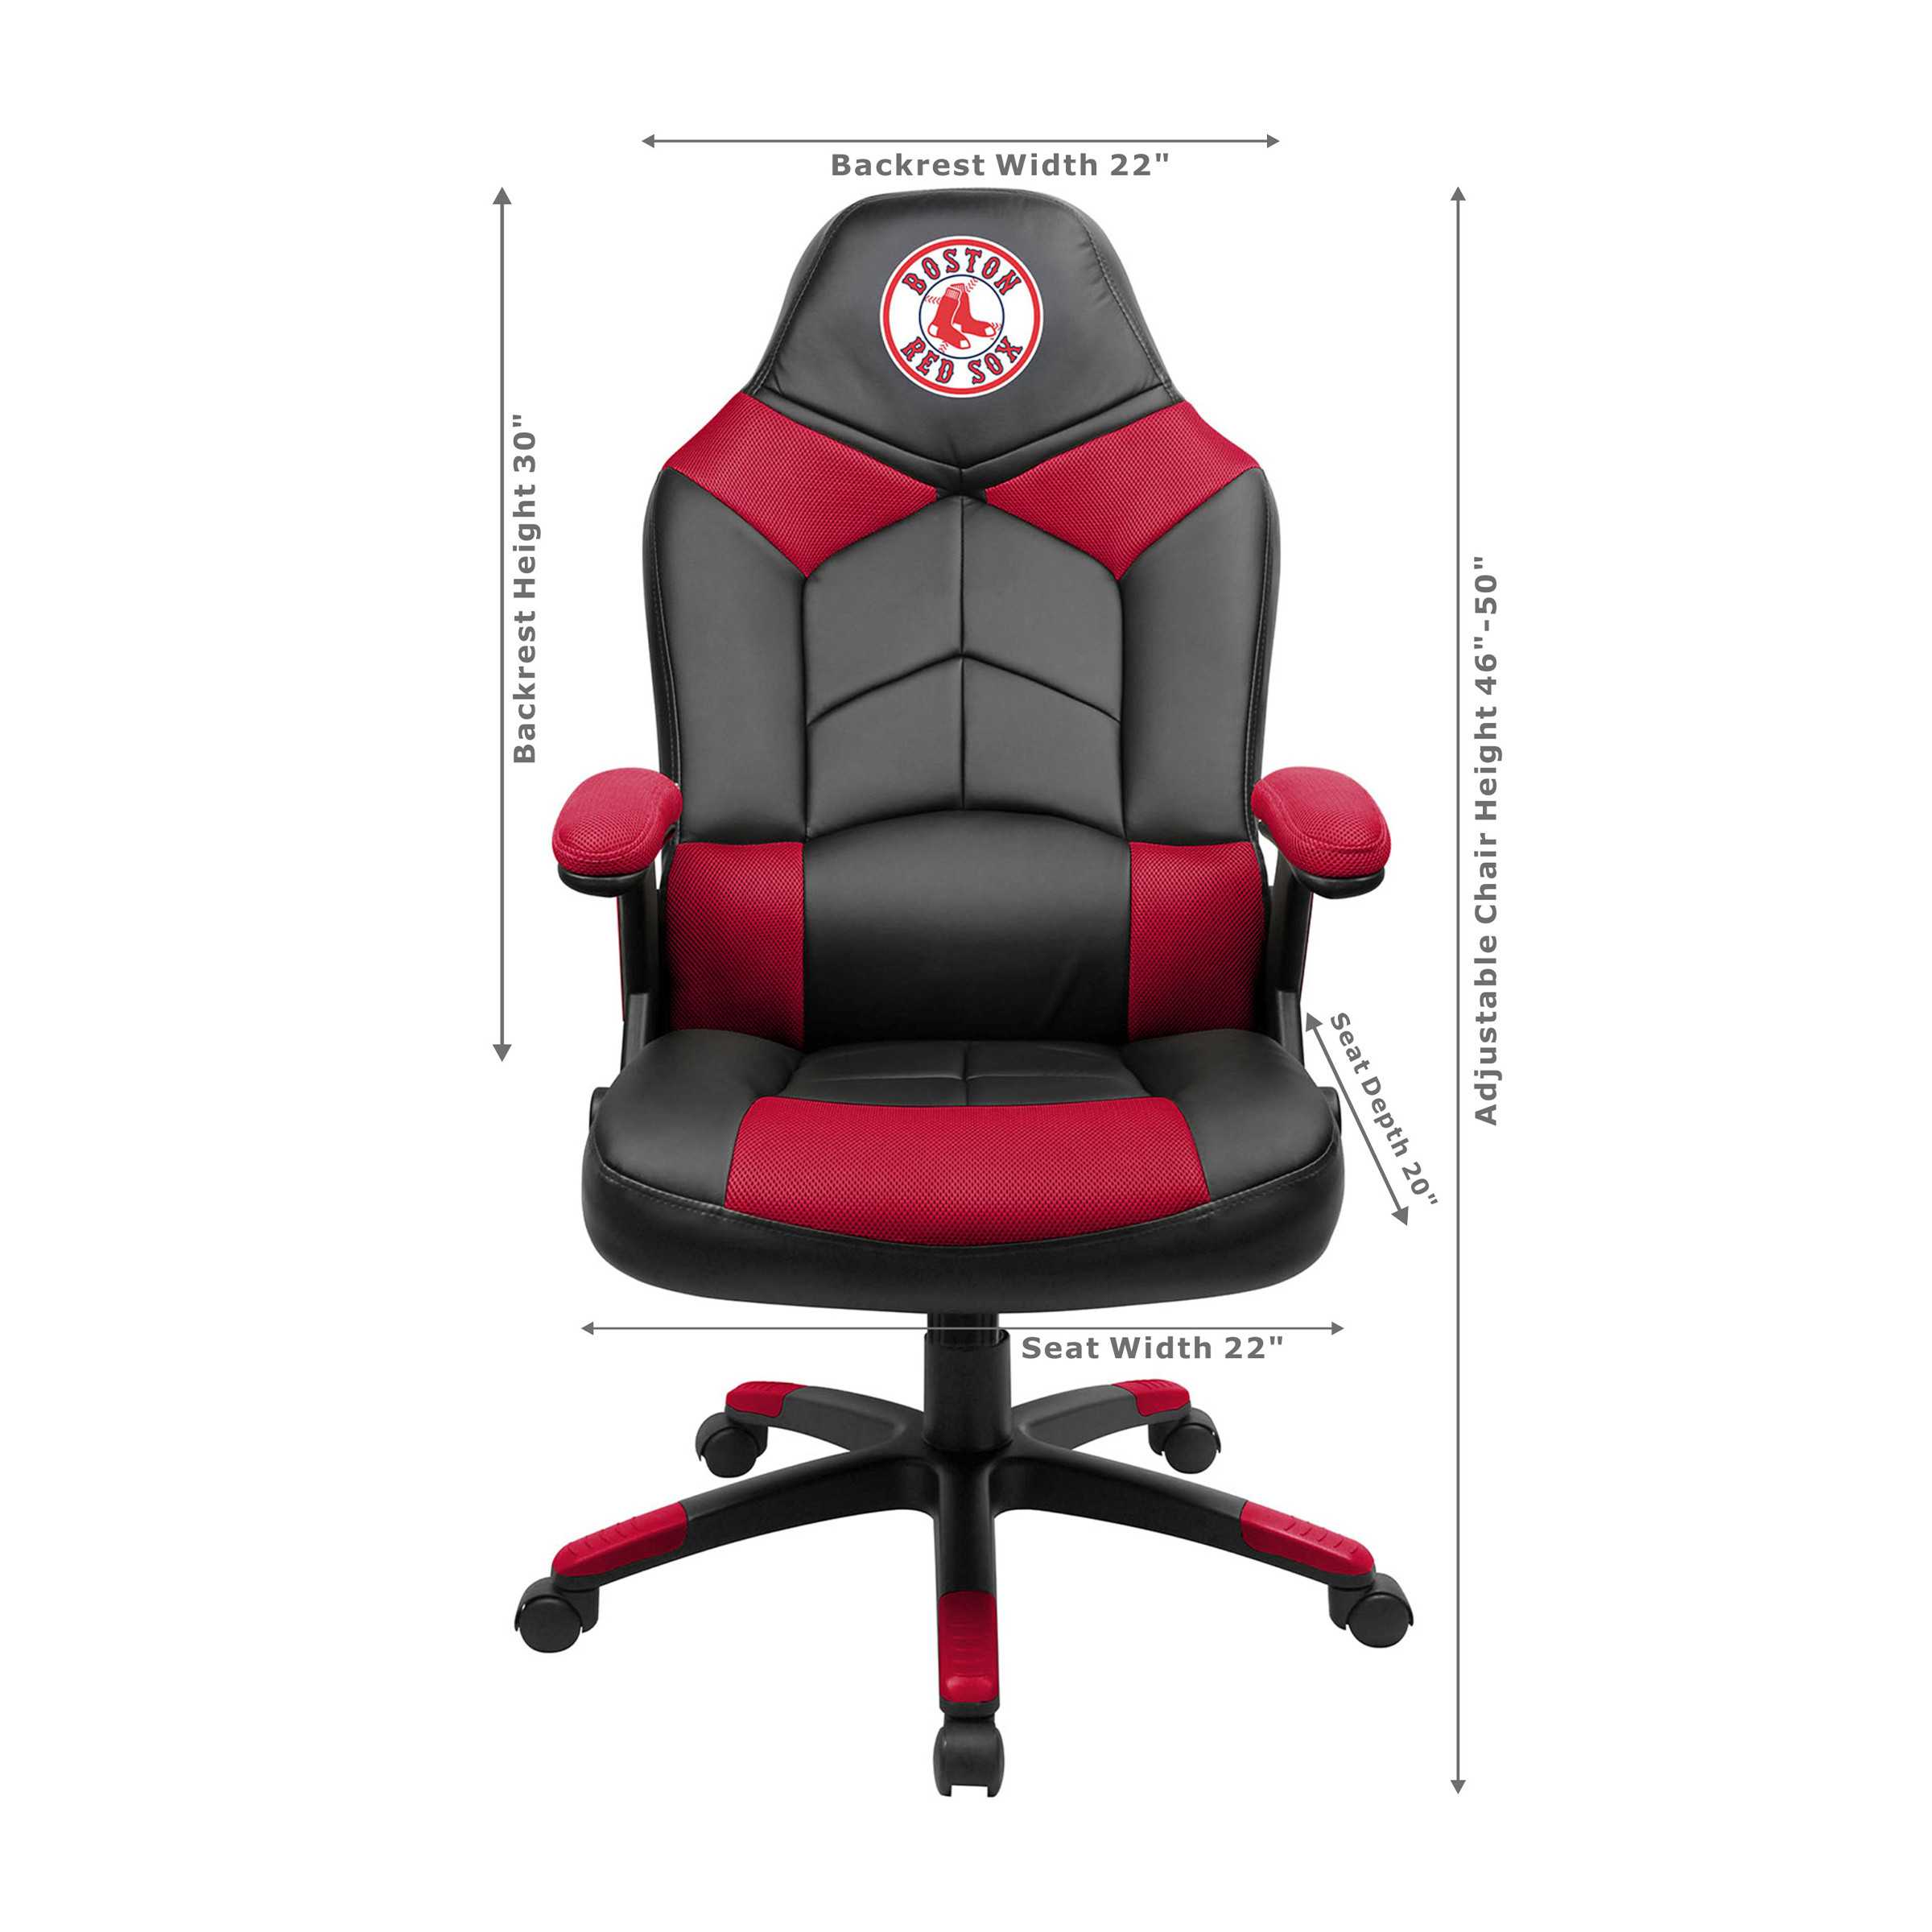 BOSTON REDSOX OVERSIZED GAMING CHAIR